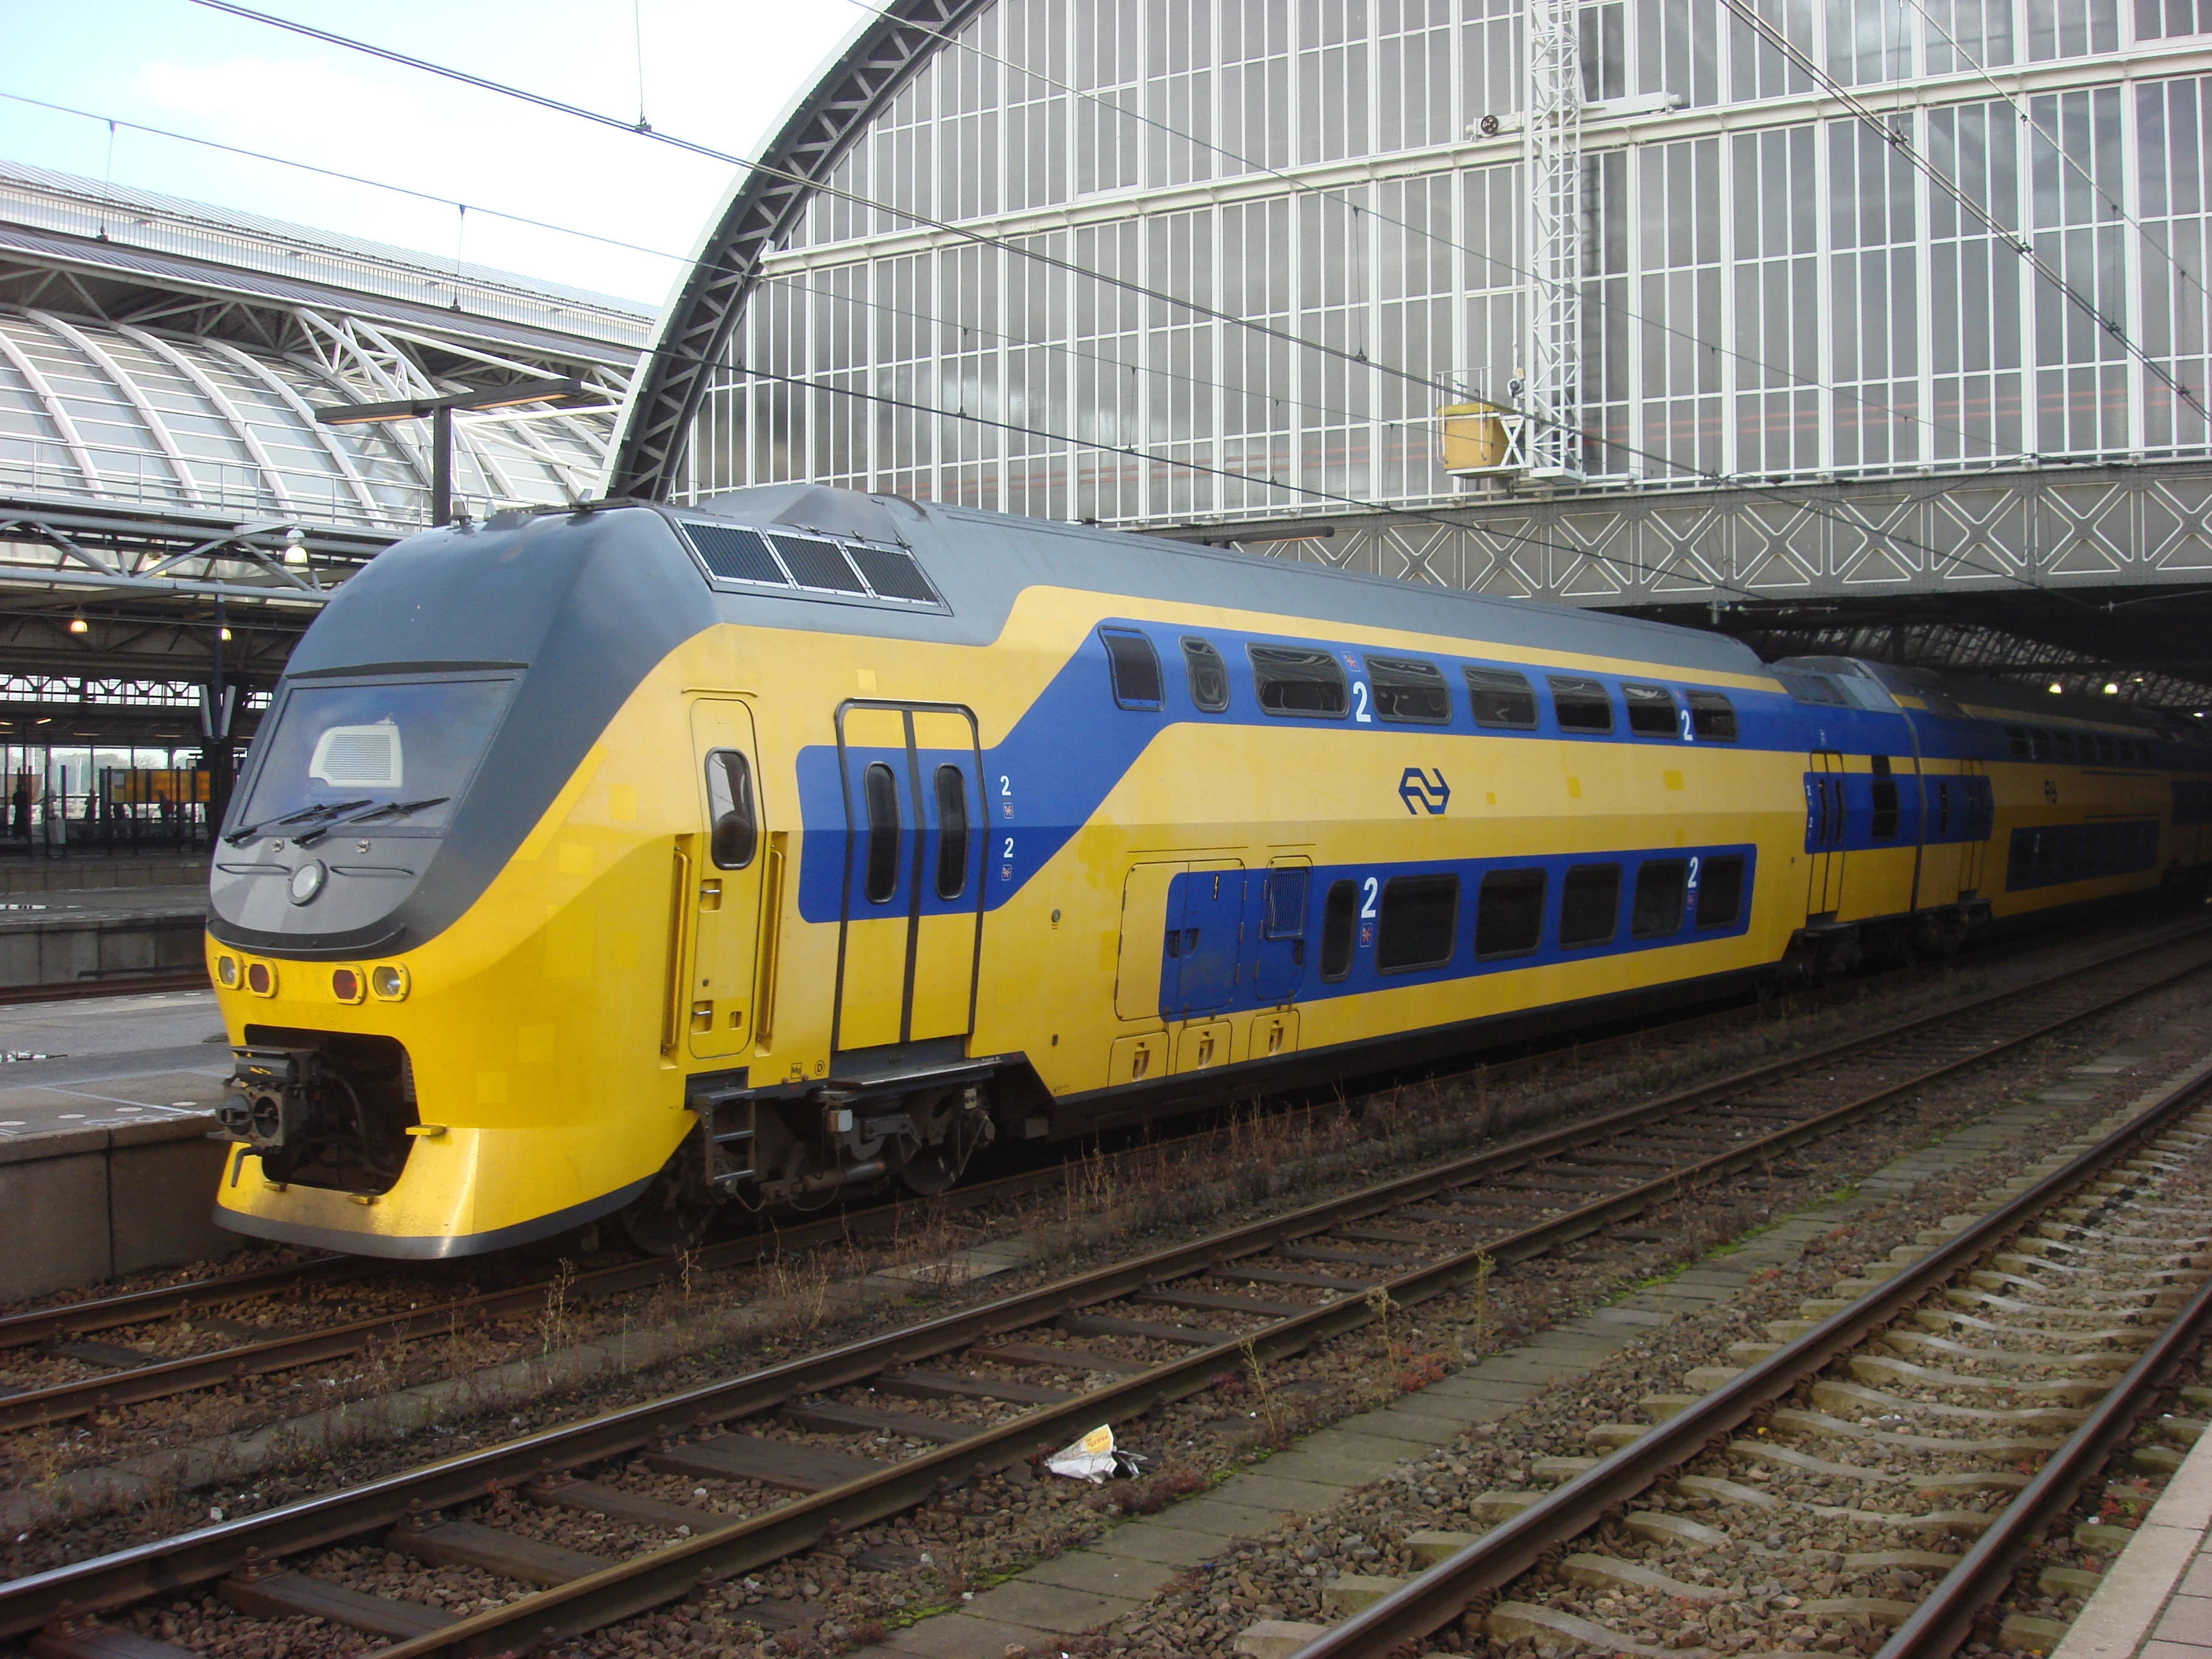 A typical yellow-and-blue Dutch train pulling out of a train station.